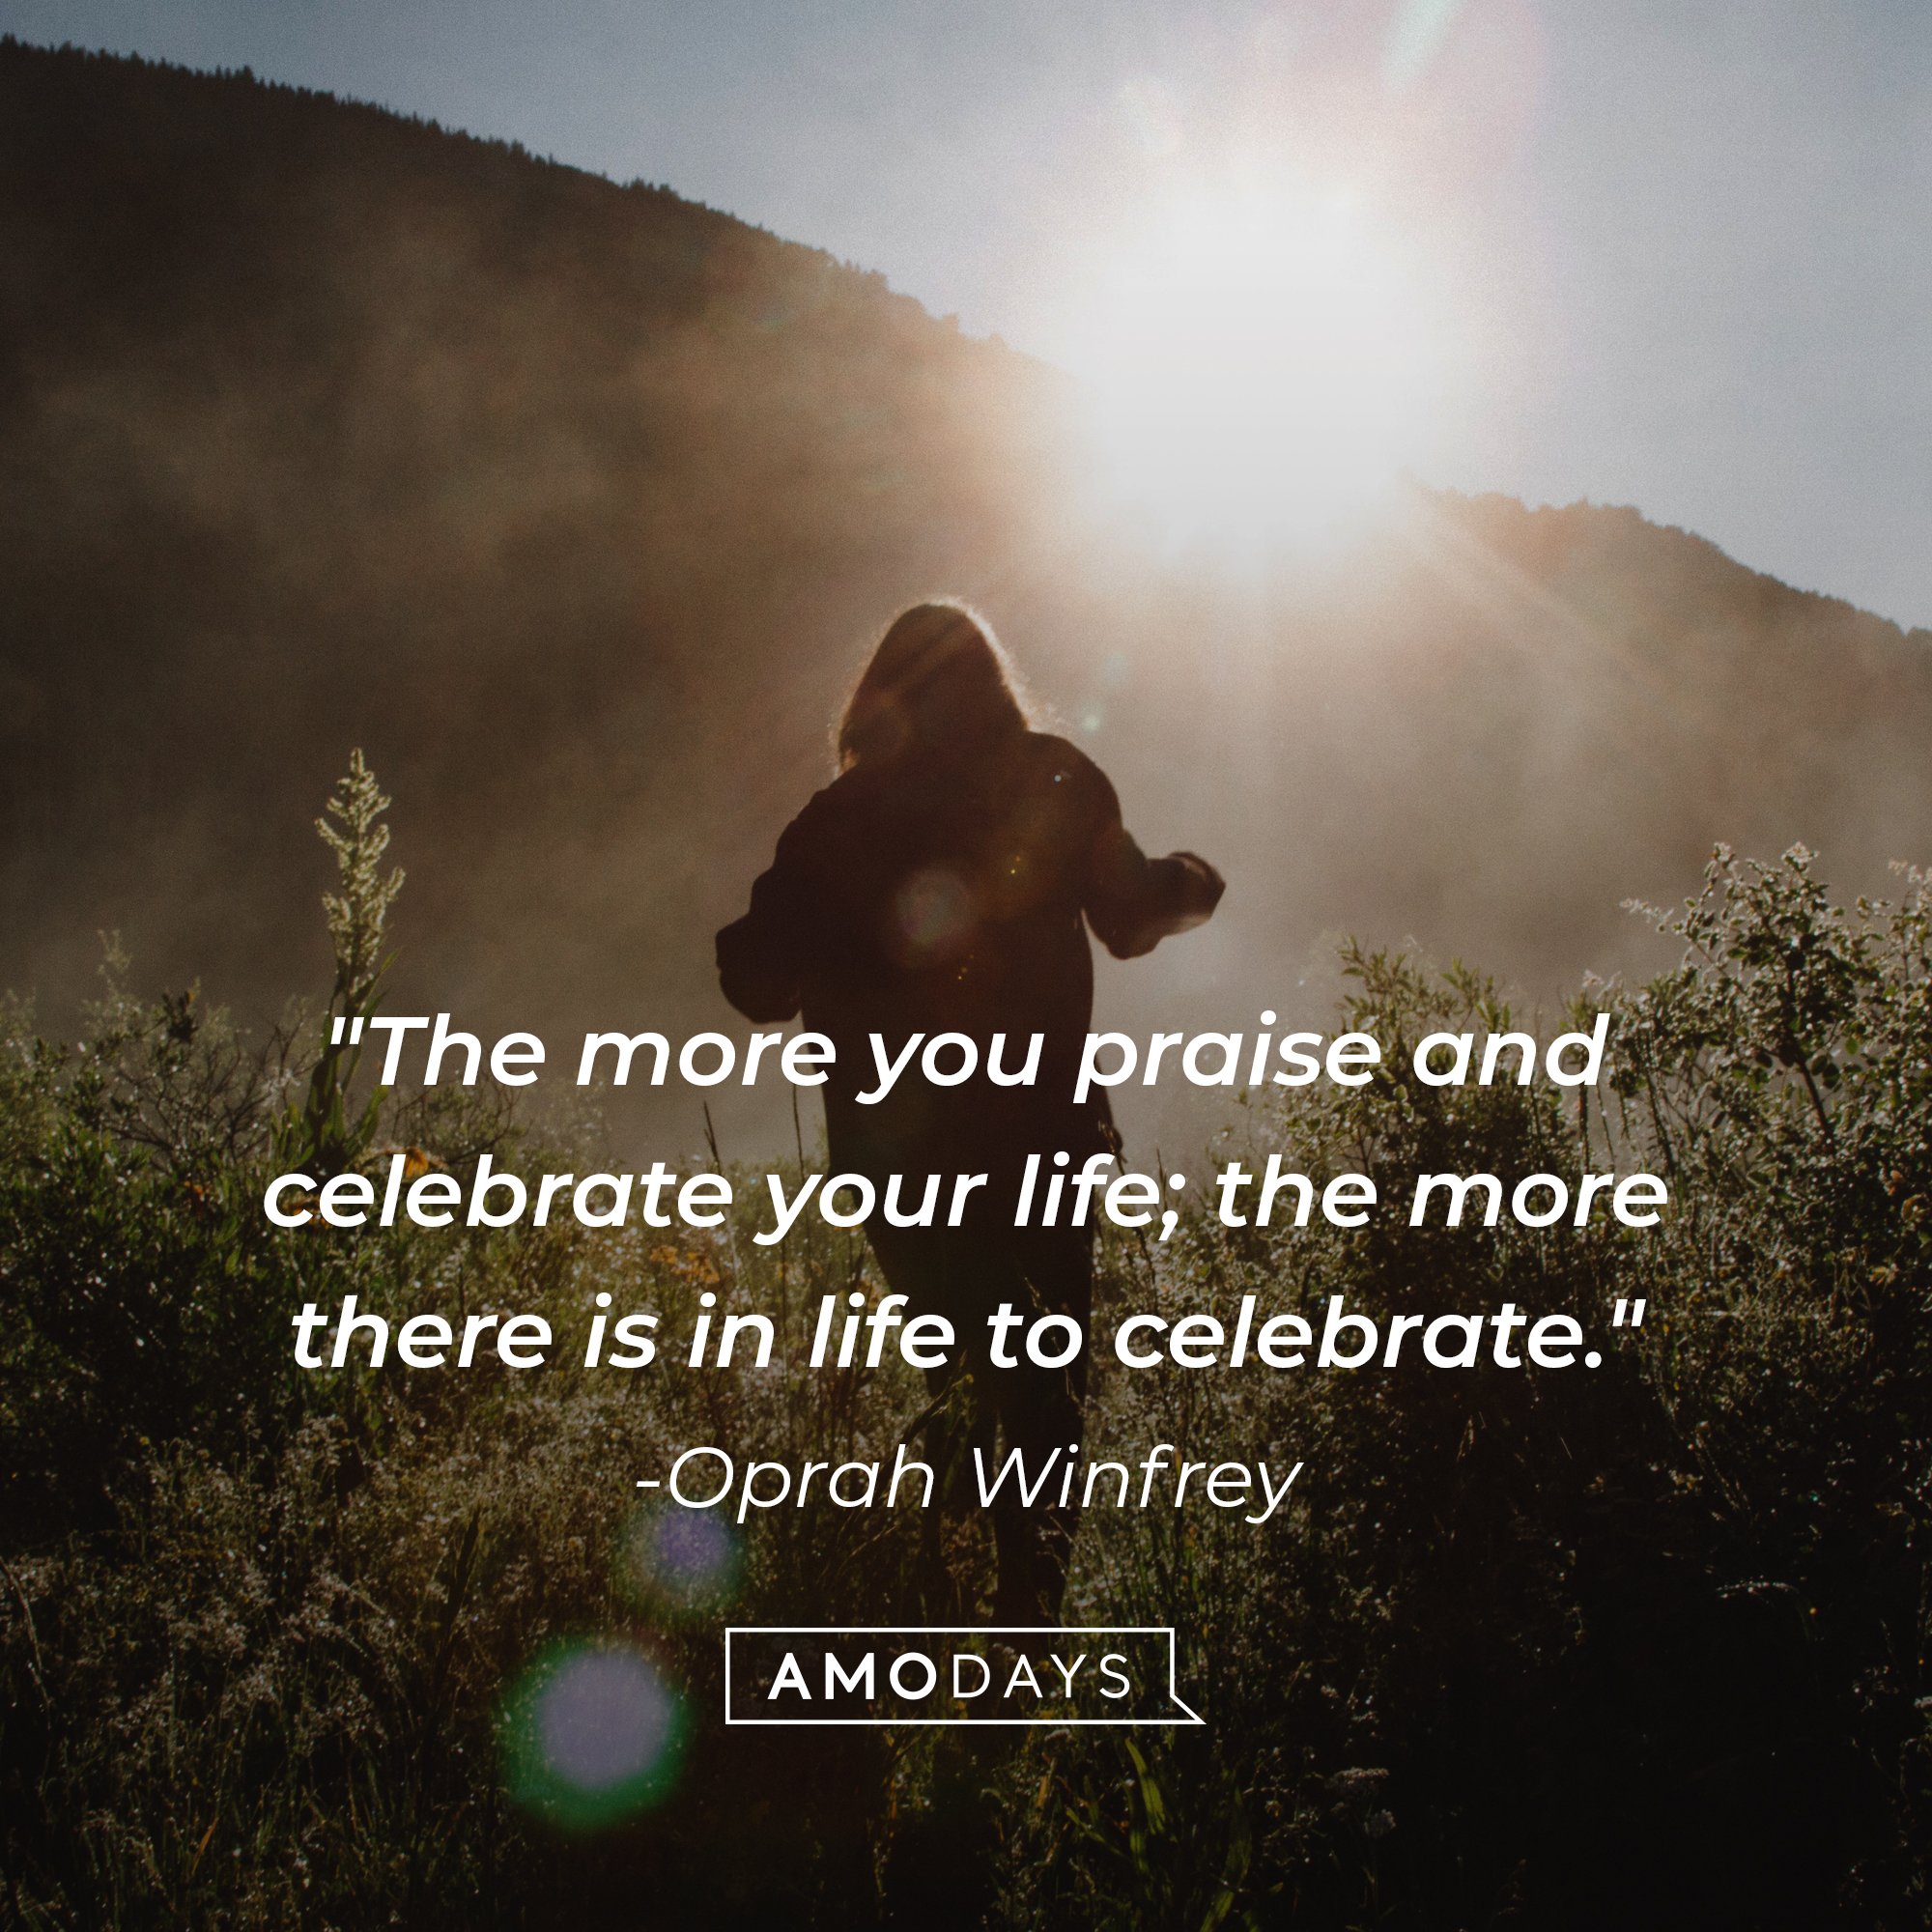 Oprah Winfrey’s quote: "The more you praise and celebrate your life; the more there is in life to celebrate." | Image: AmoDays